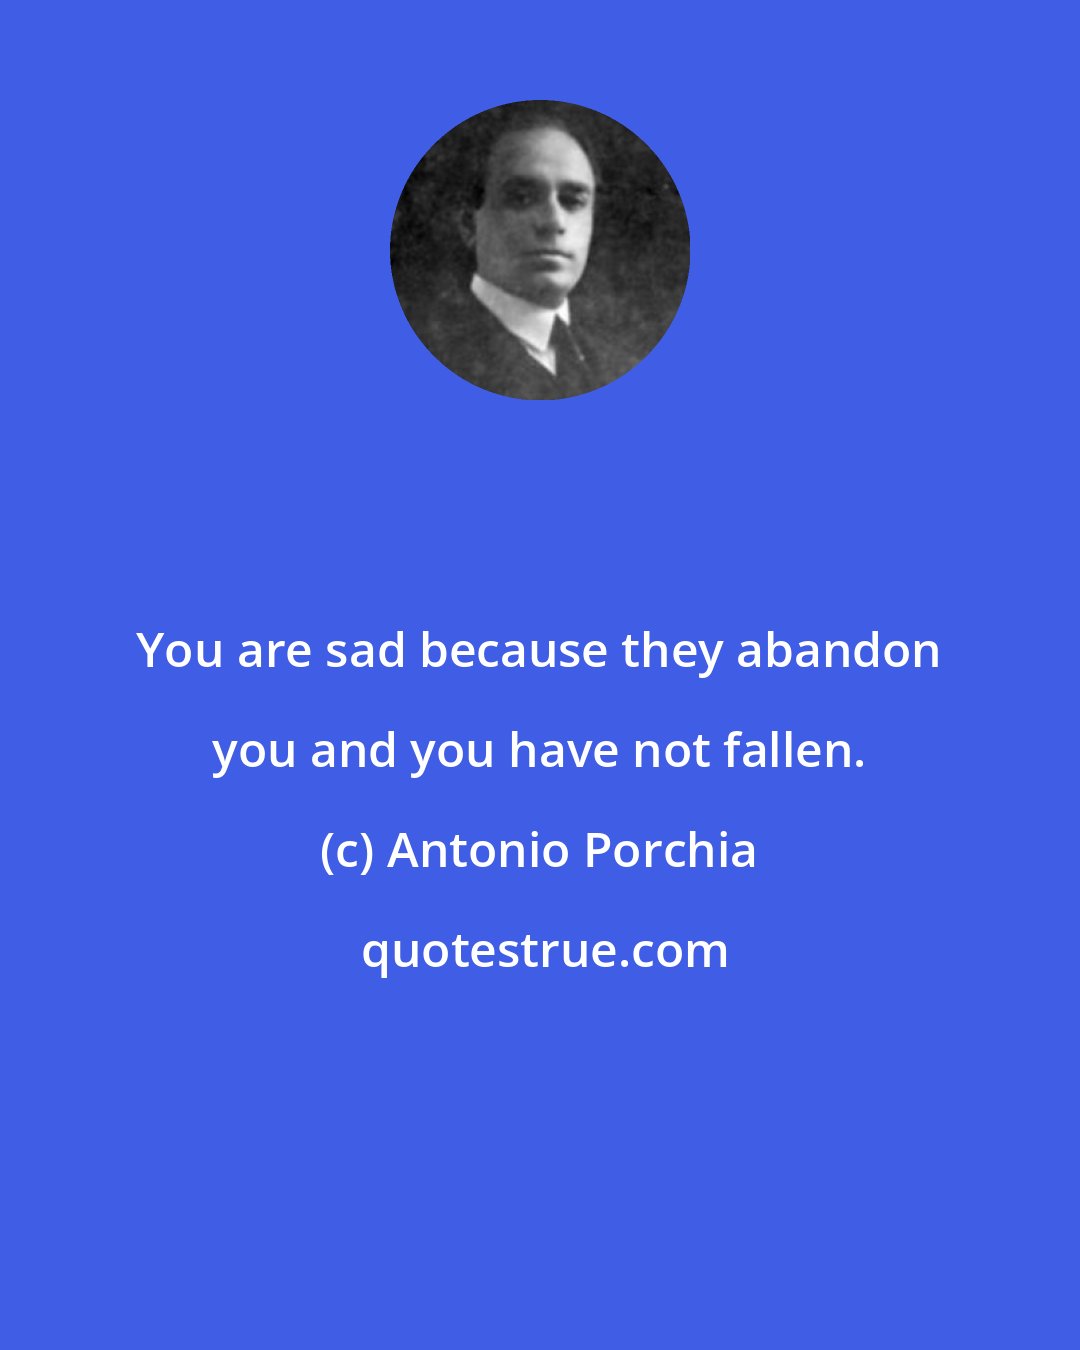 Antonio Porchia: You are sad because they abandon you and you have not fallen.